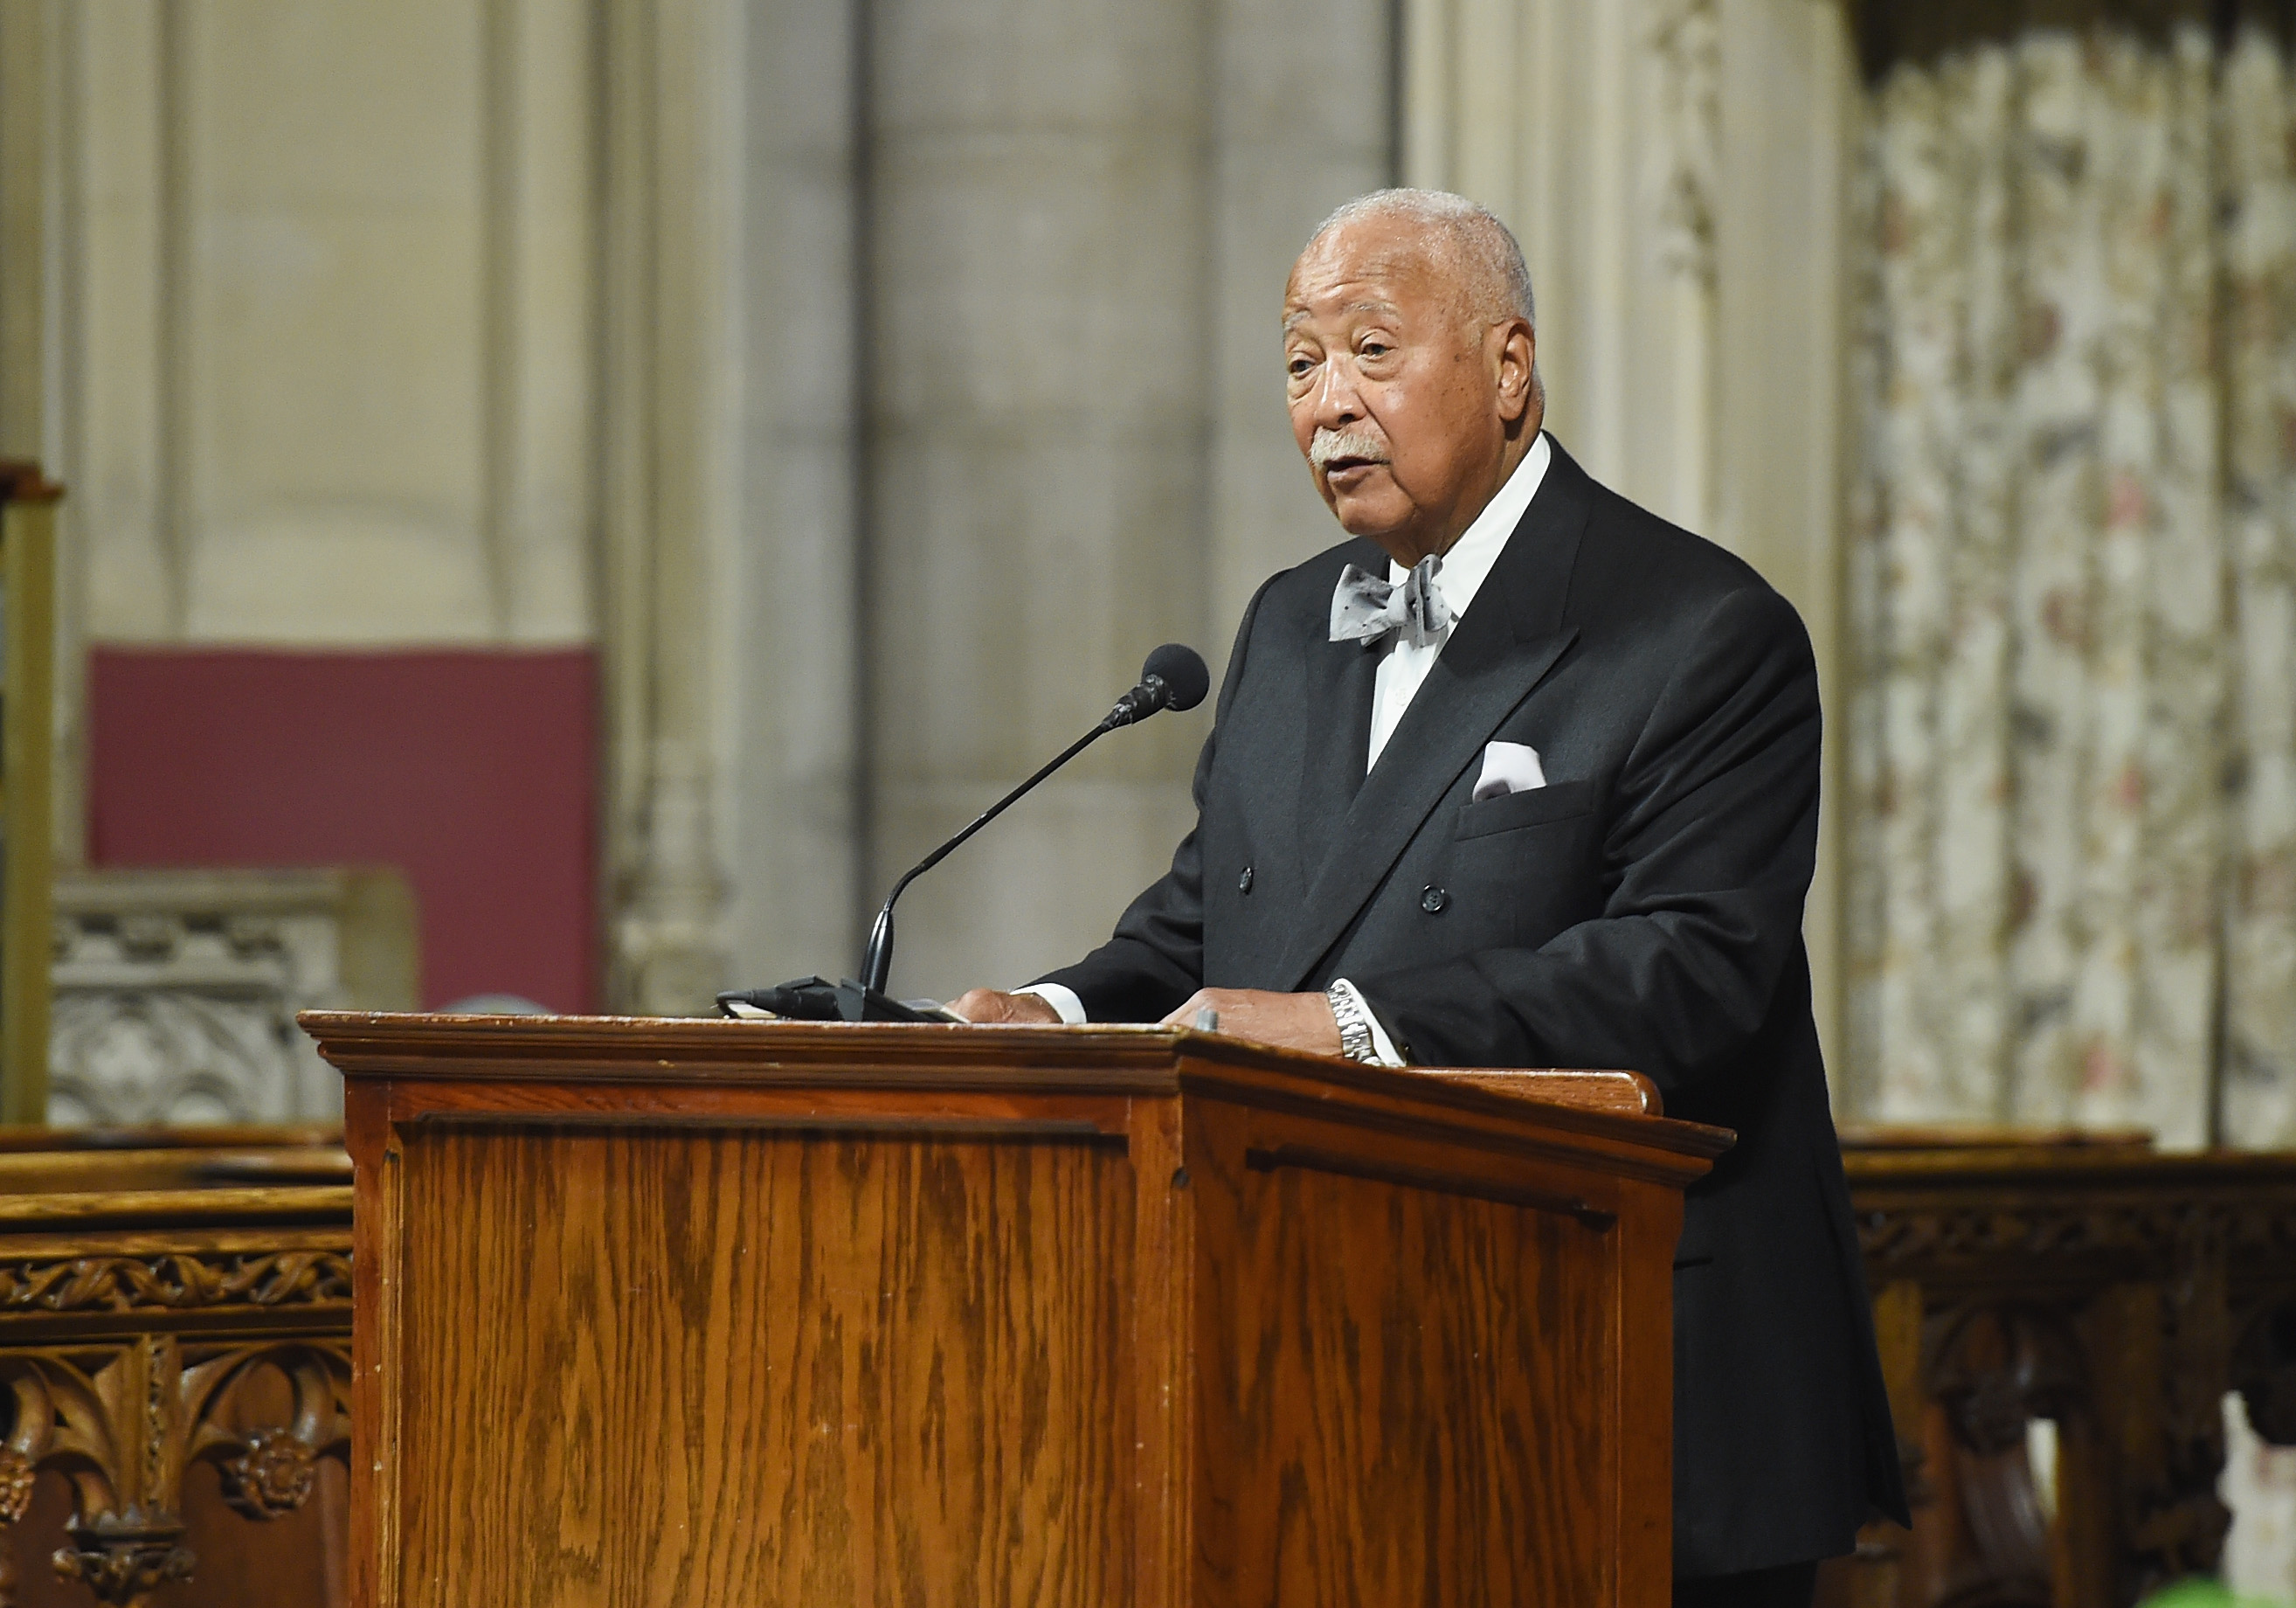 Former Mayor David Dinkins. (Photo: Mike Coppola/Getty Images)